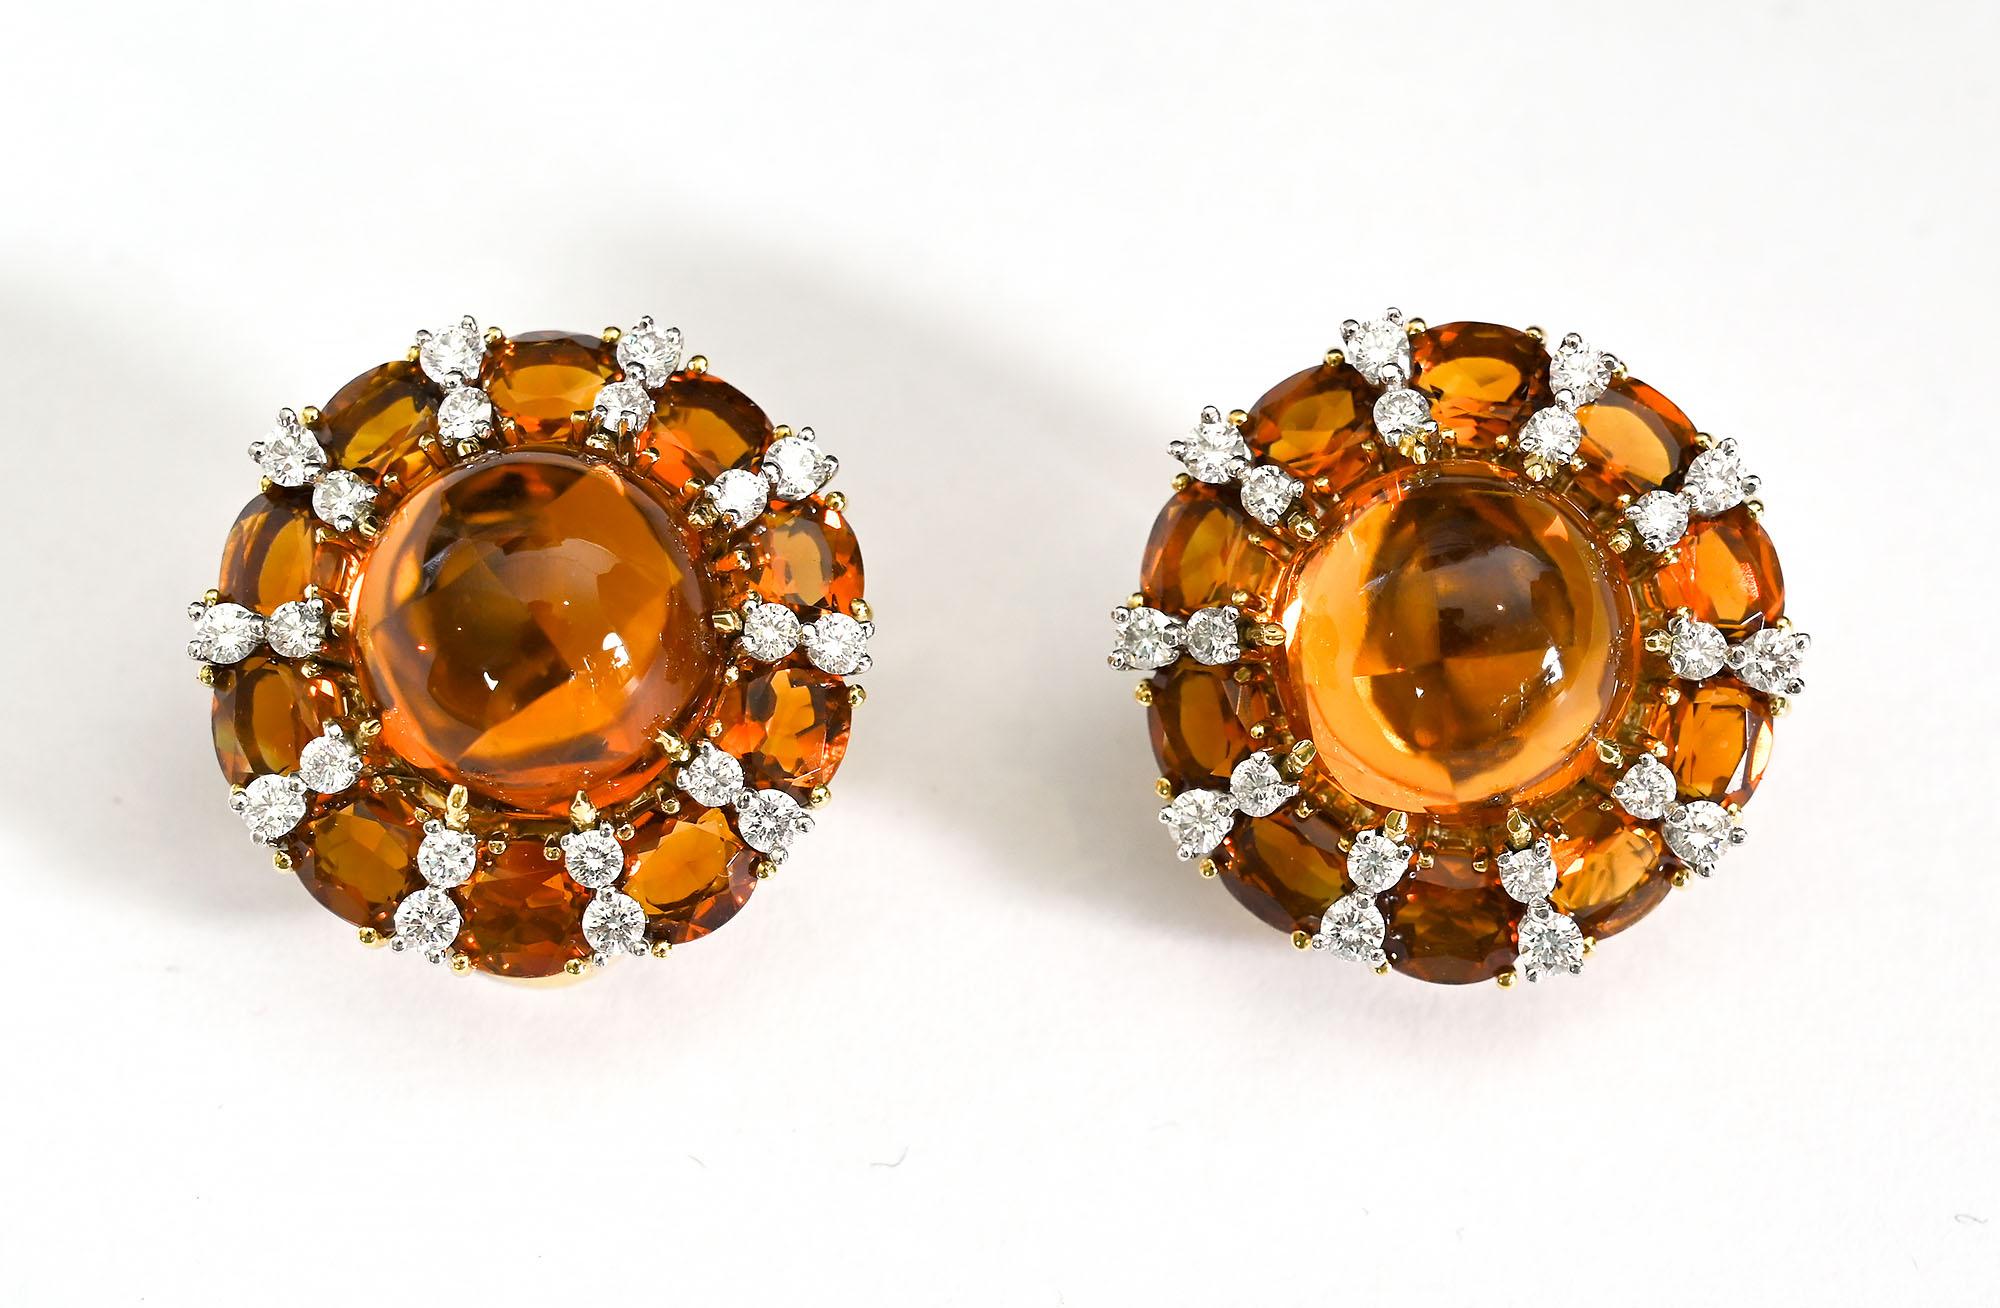 Stunning and elegant citrine and diamond earrings by New York famous jeweler, Valentin Magro. The earrings are centered with a cabochon citrine measuring approximately 13.5 mm in diameter. They are surrounded with spokes of diamonds and citrines.